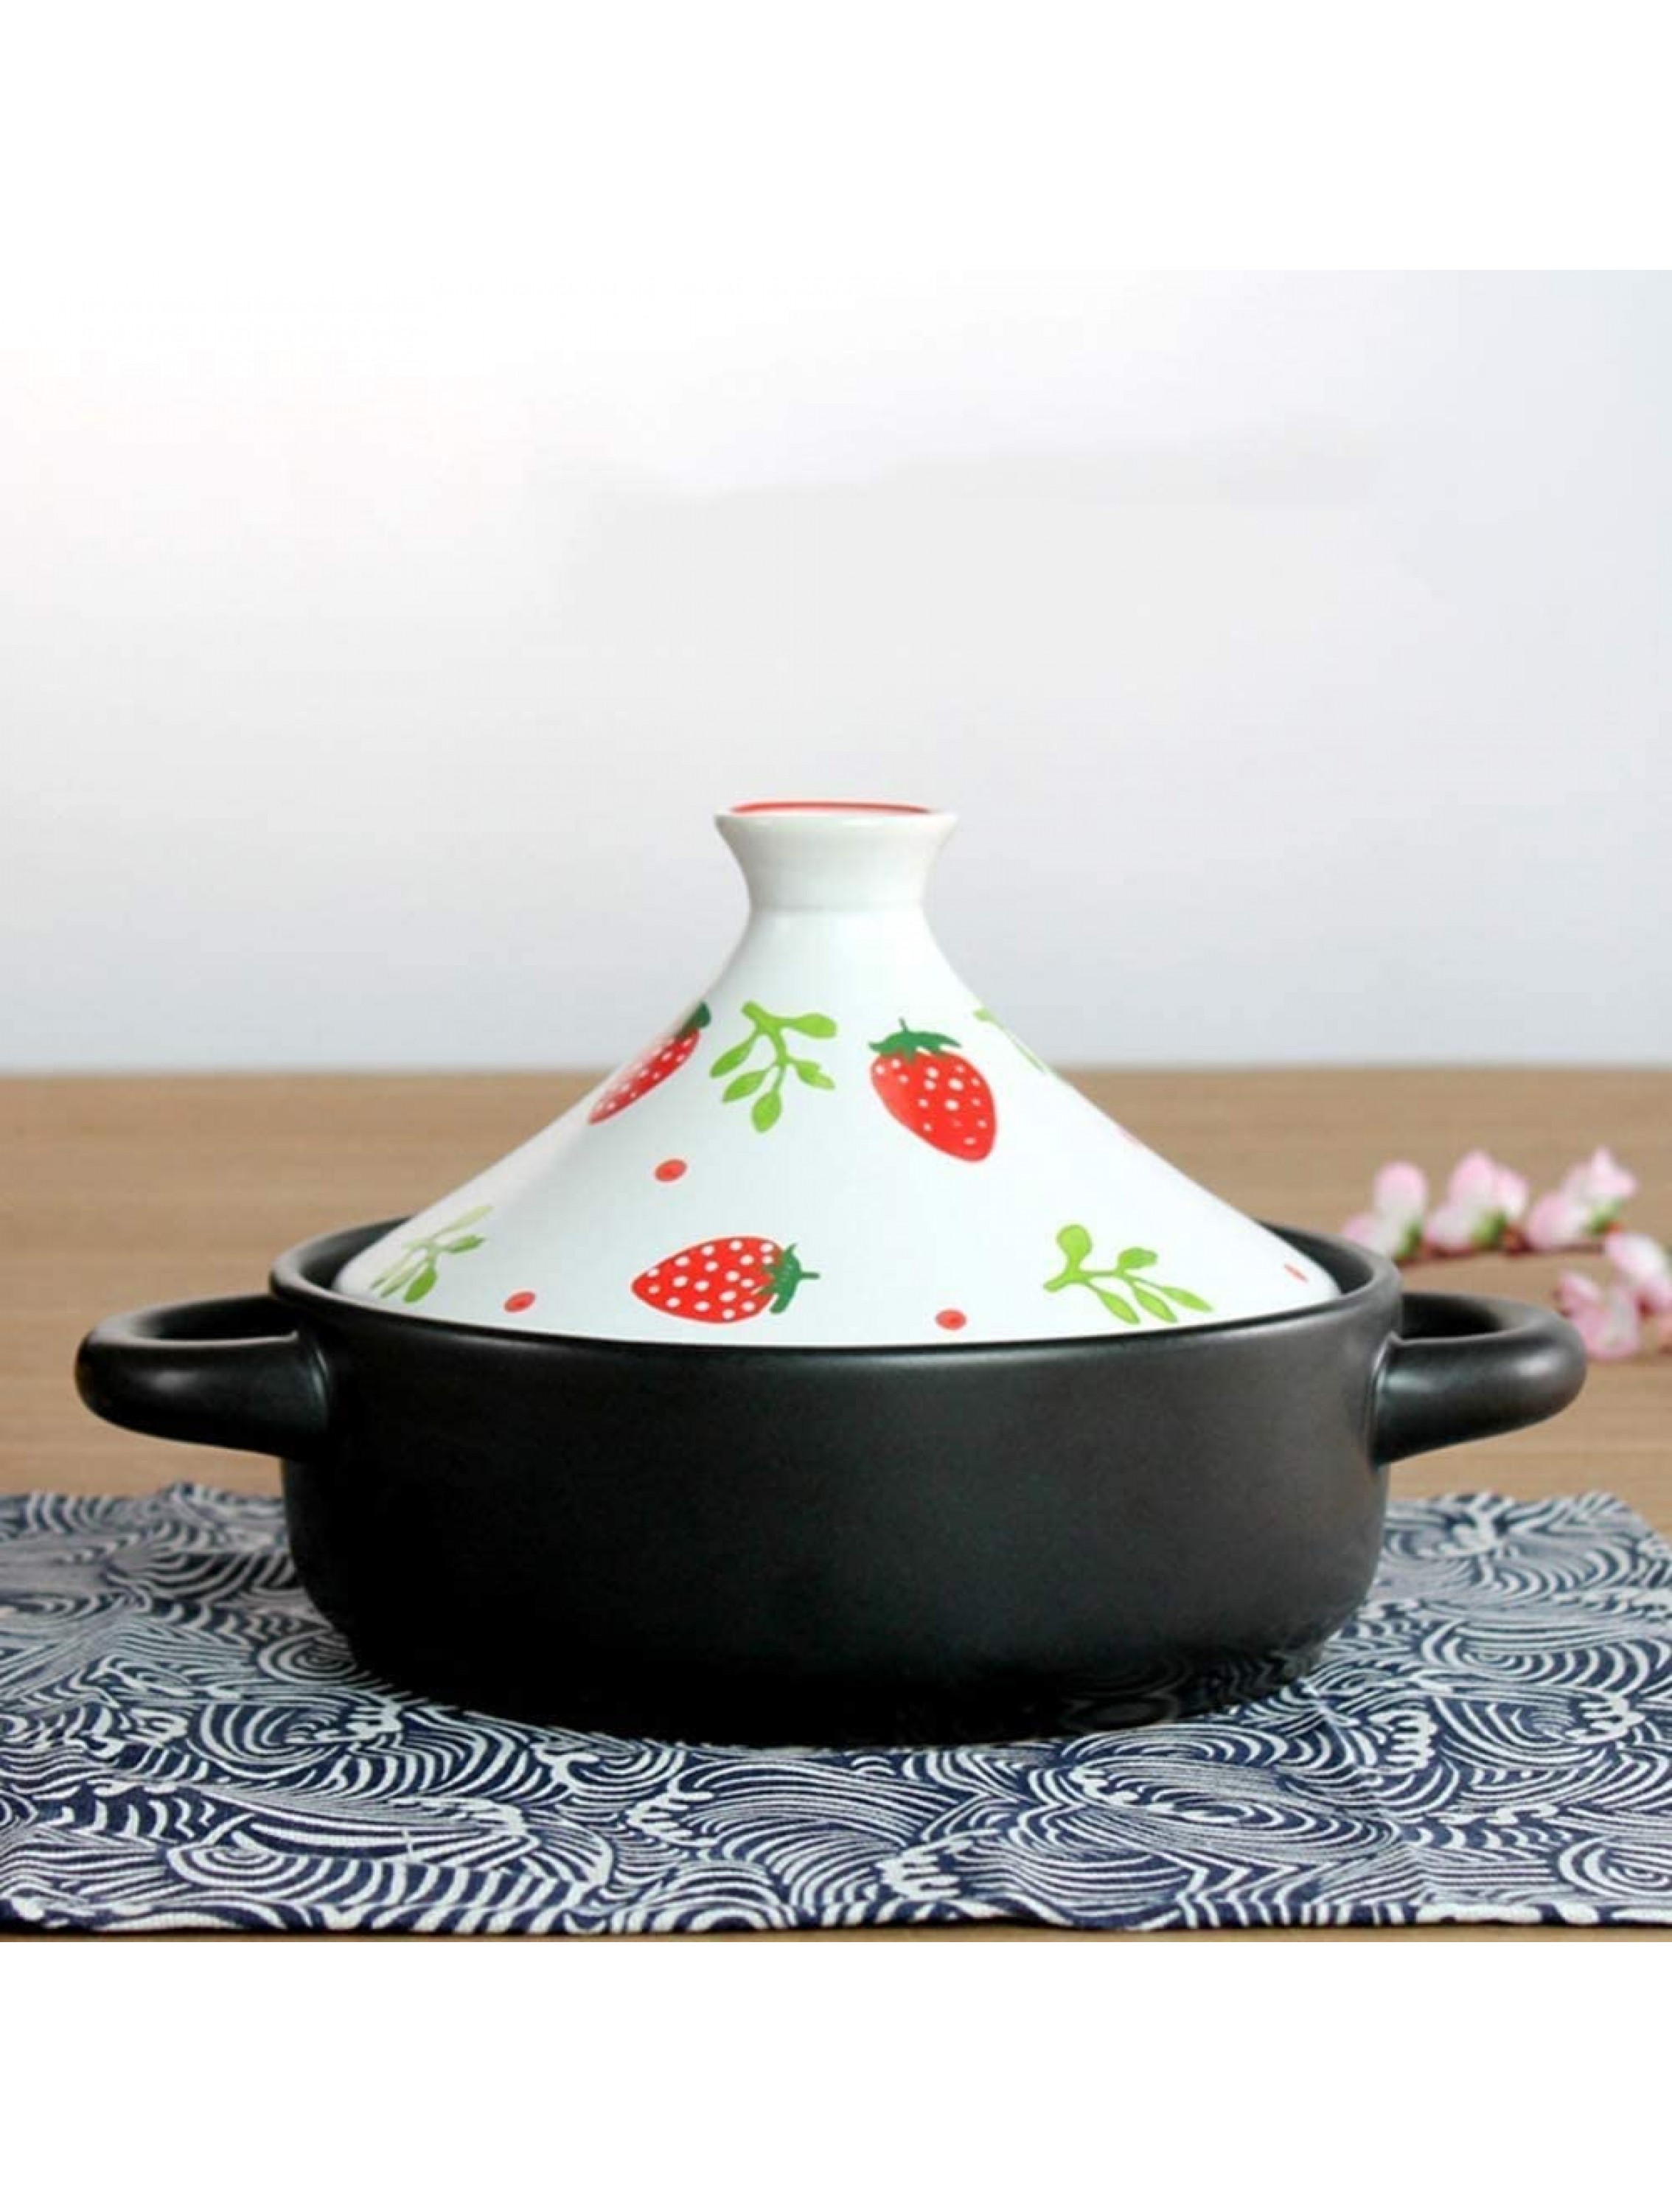 Chinese pottery -Cooker Pot 20cm Tagine Pot with Handle|High Temperature Resistance Ceramic Pot|Hand-Made Slow Cooker|for Most Open Flame Cookware Color : White 2 - BRIWEEZPS